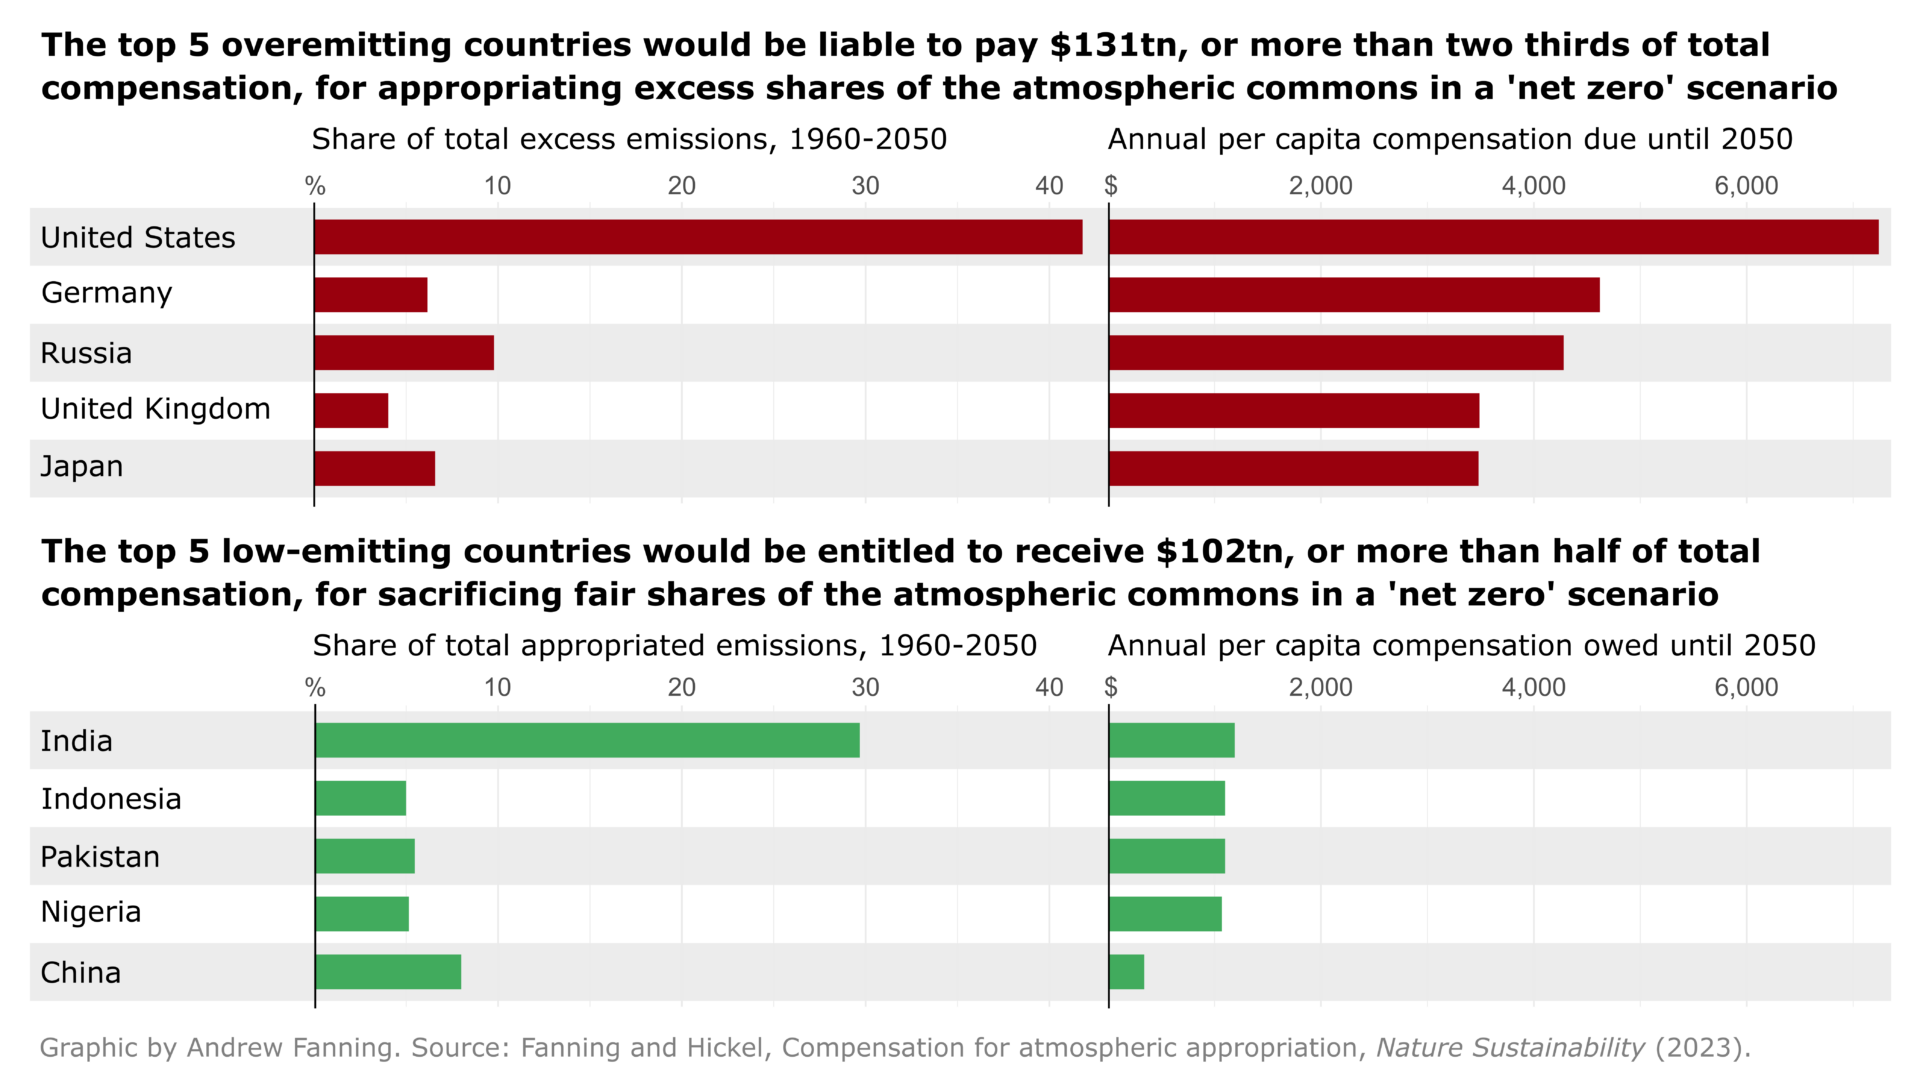 Bar chart of top 5 overemitting and low-emitting countries showing shares of total excess or appropriated emissions from 1960 to 2050, and annual per capita compensation until 2050